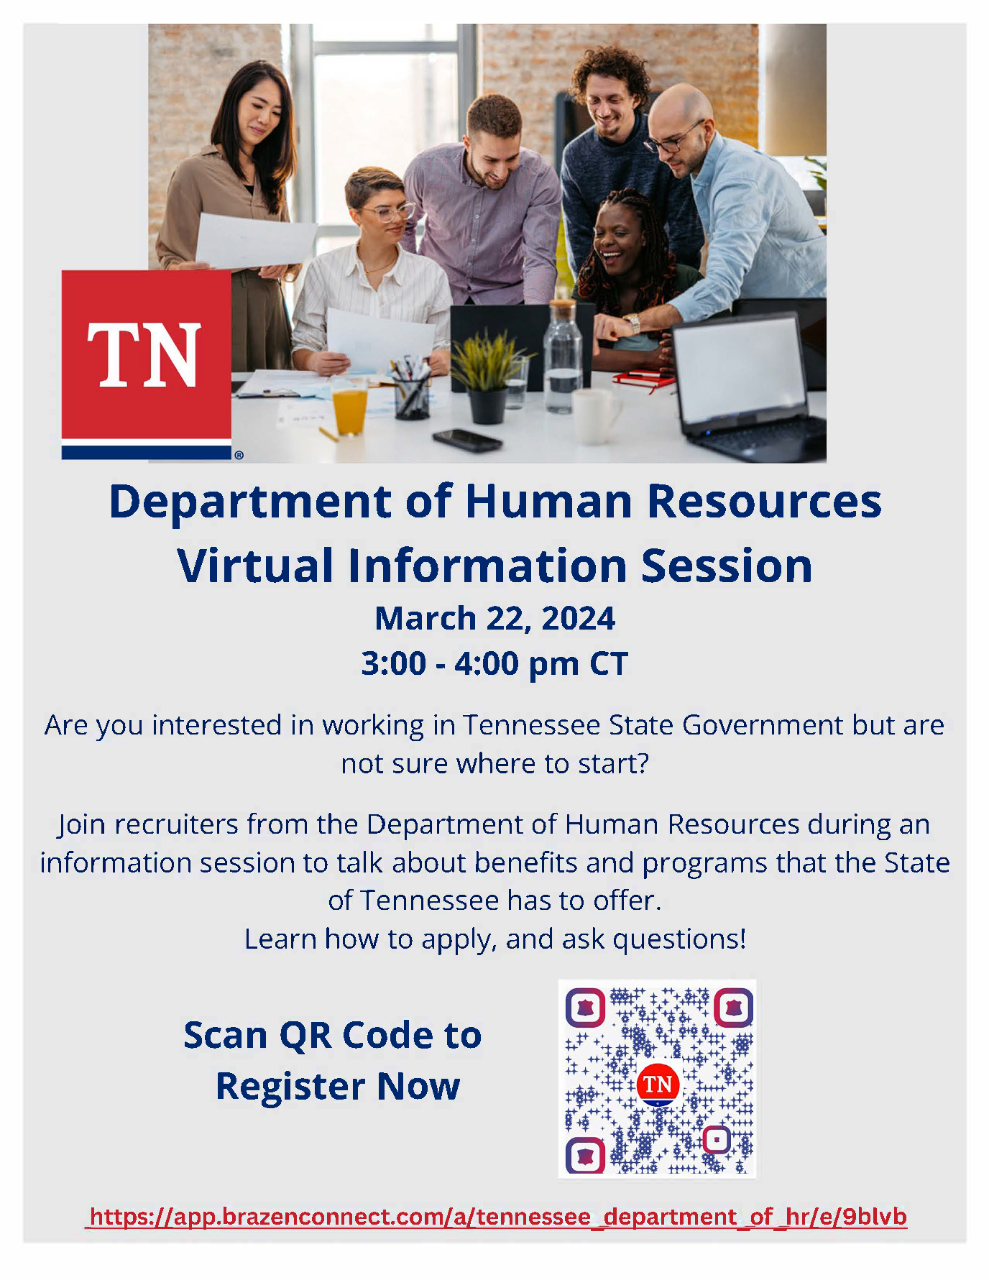 TN DOHR Virtual Information Session 3/22/2024 from 3 to 4 pm CDT